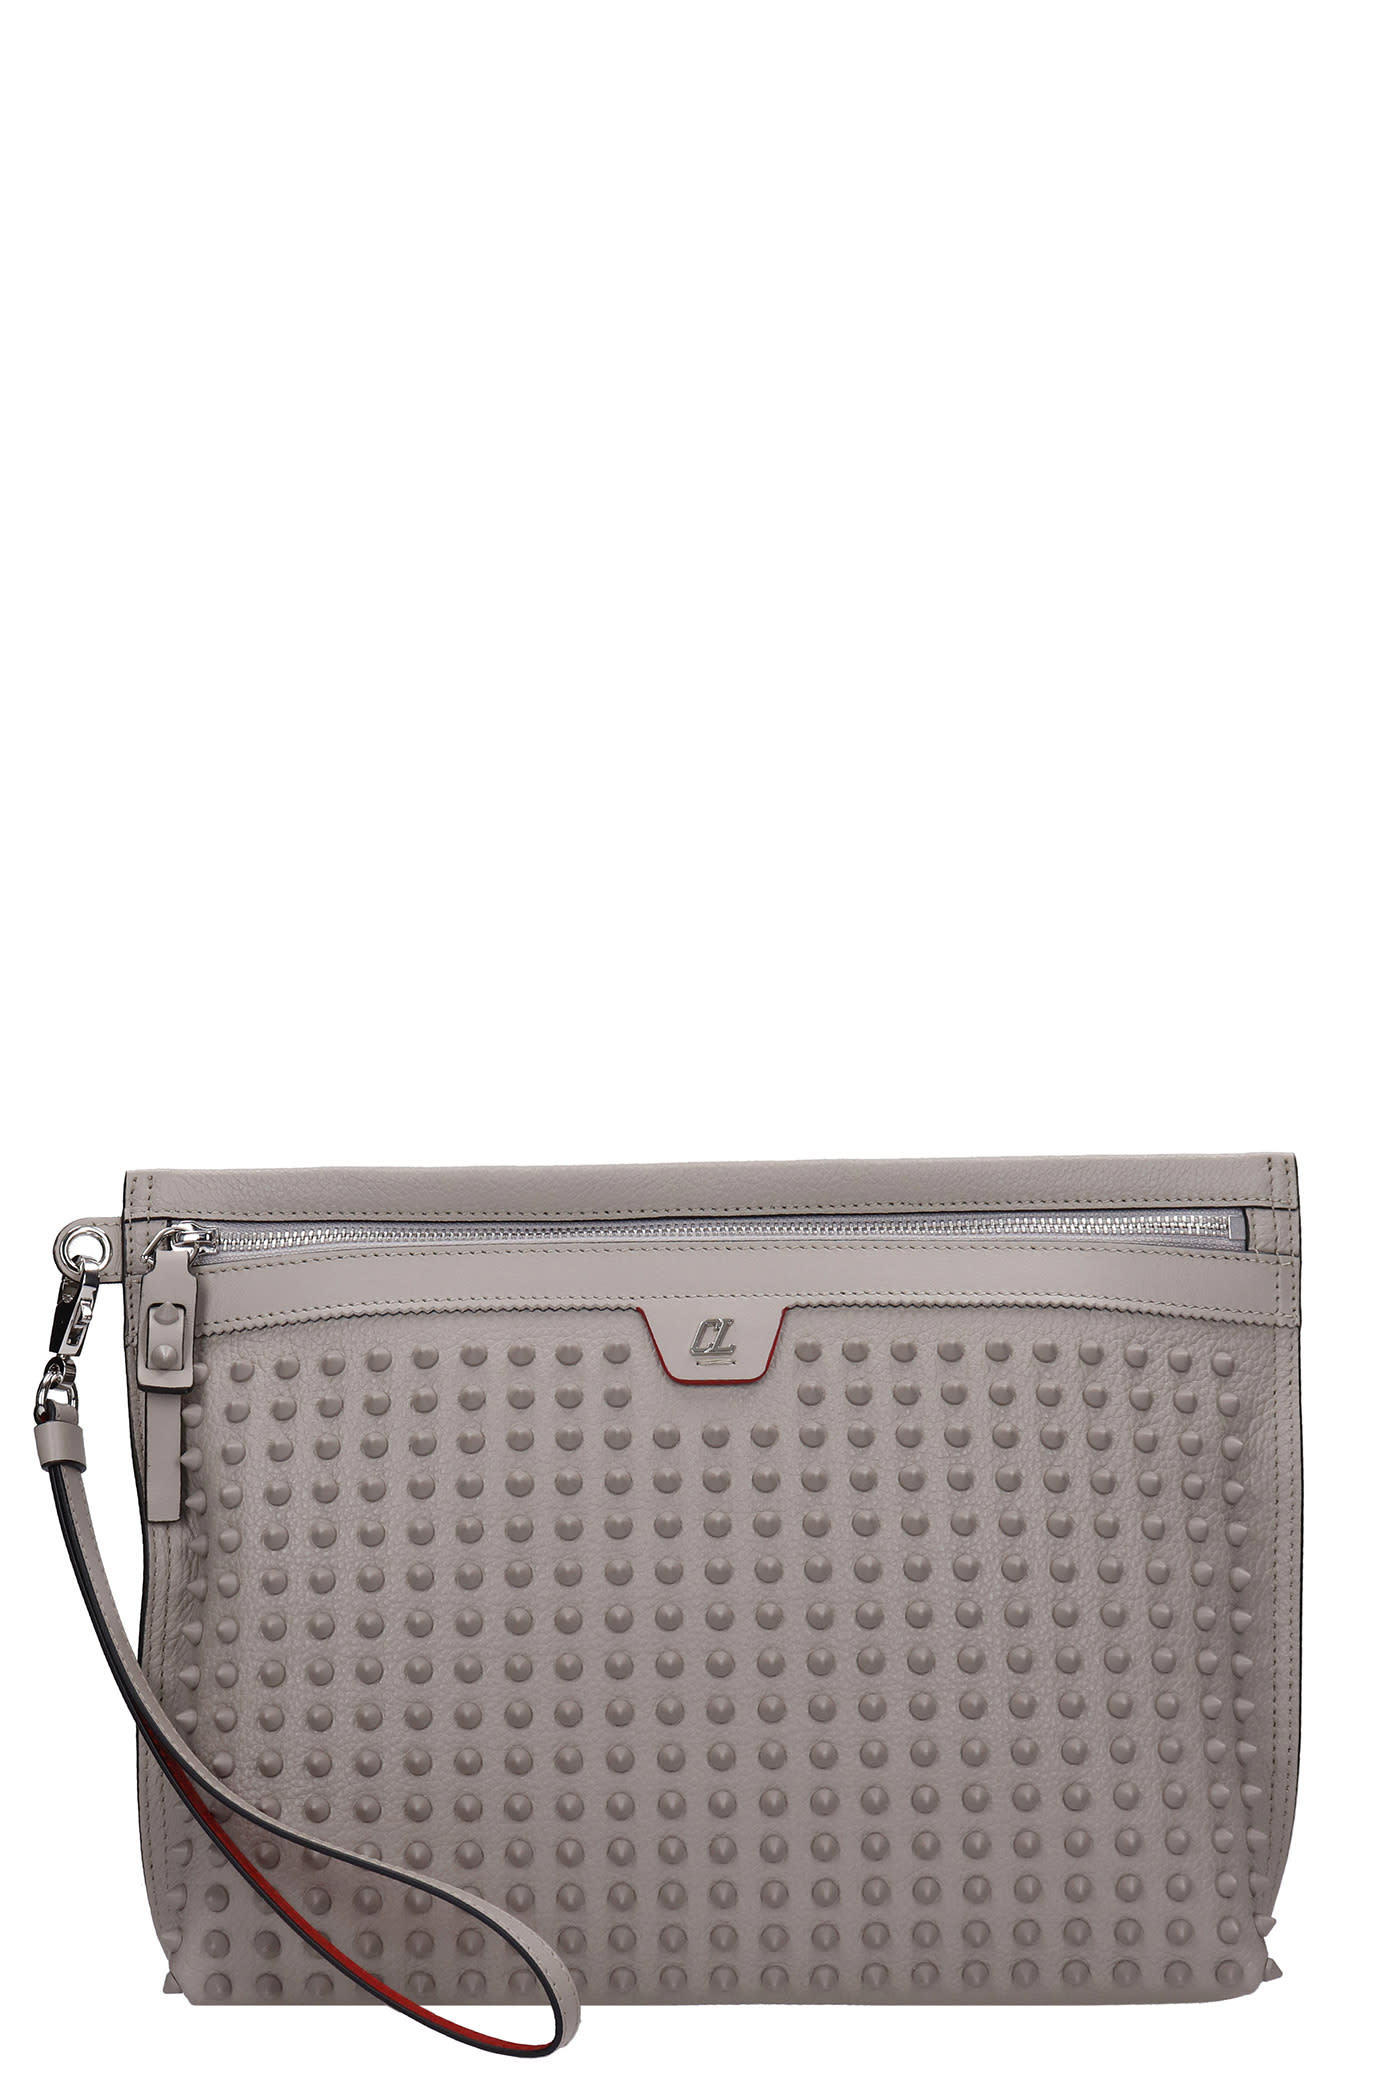 Christian Louboutin Citypouch Clutch In Grey Leather